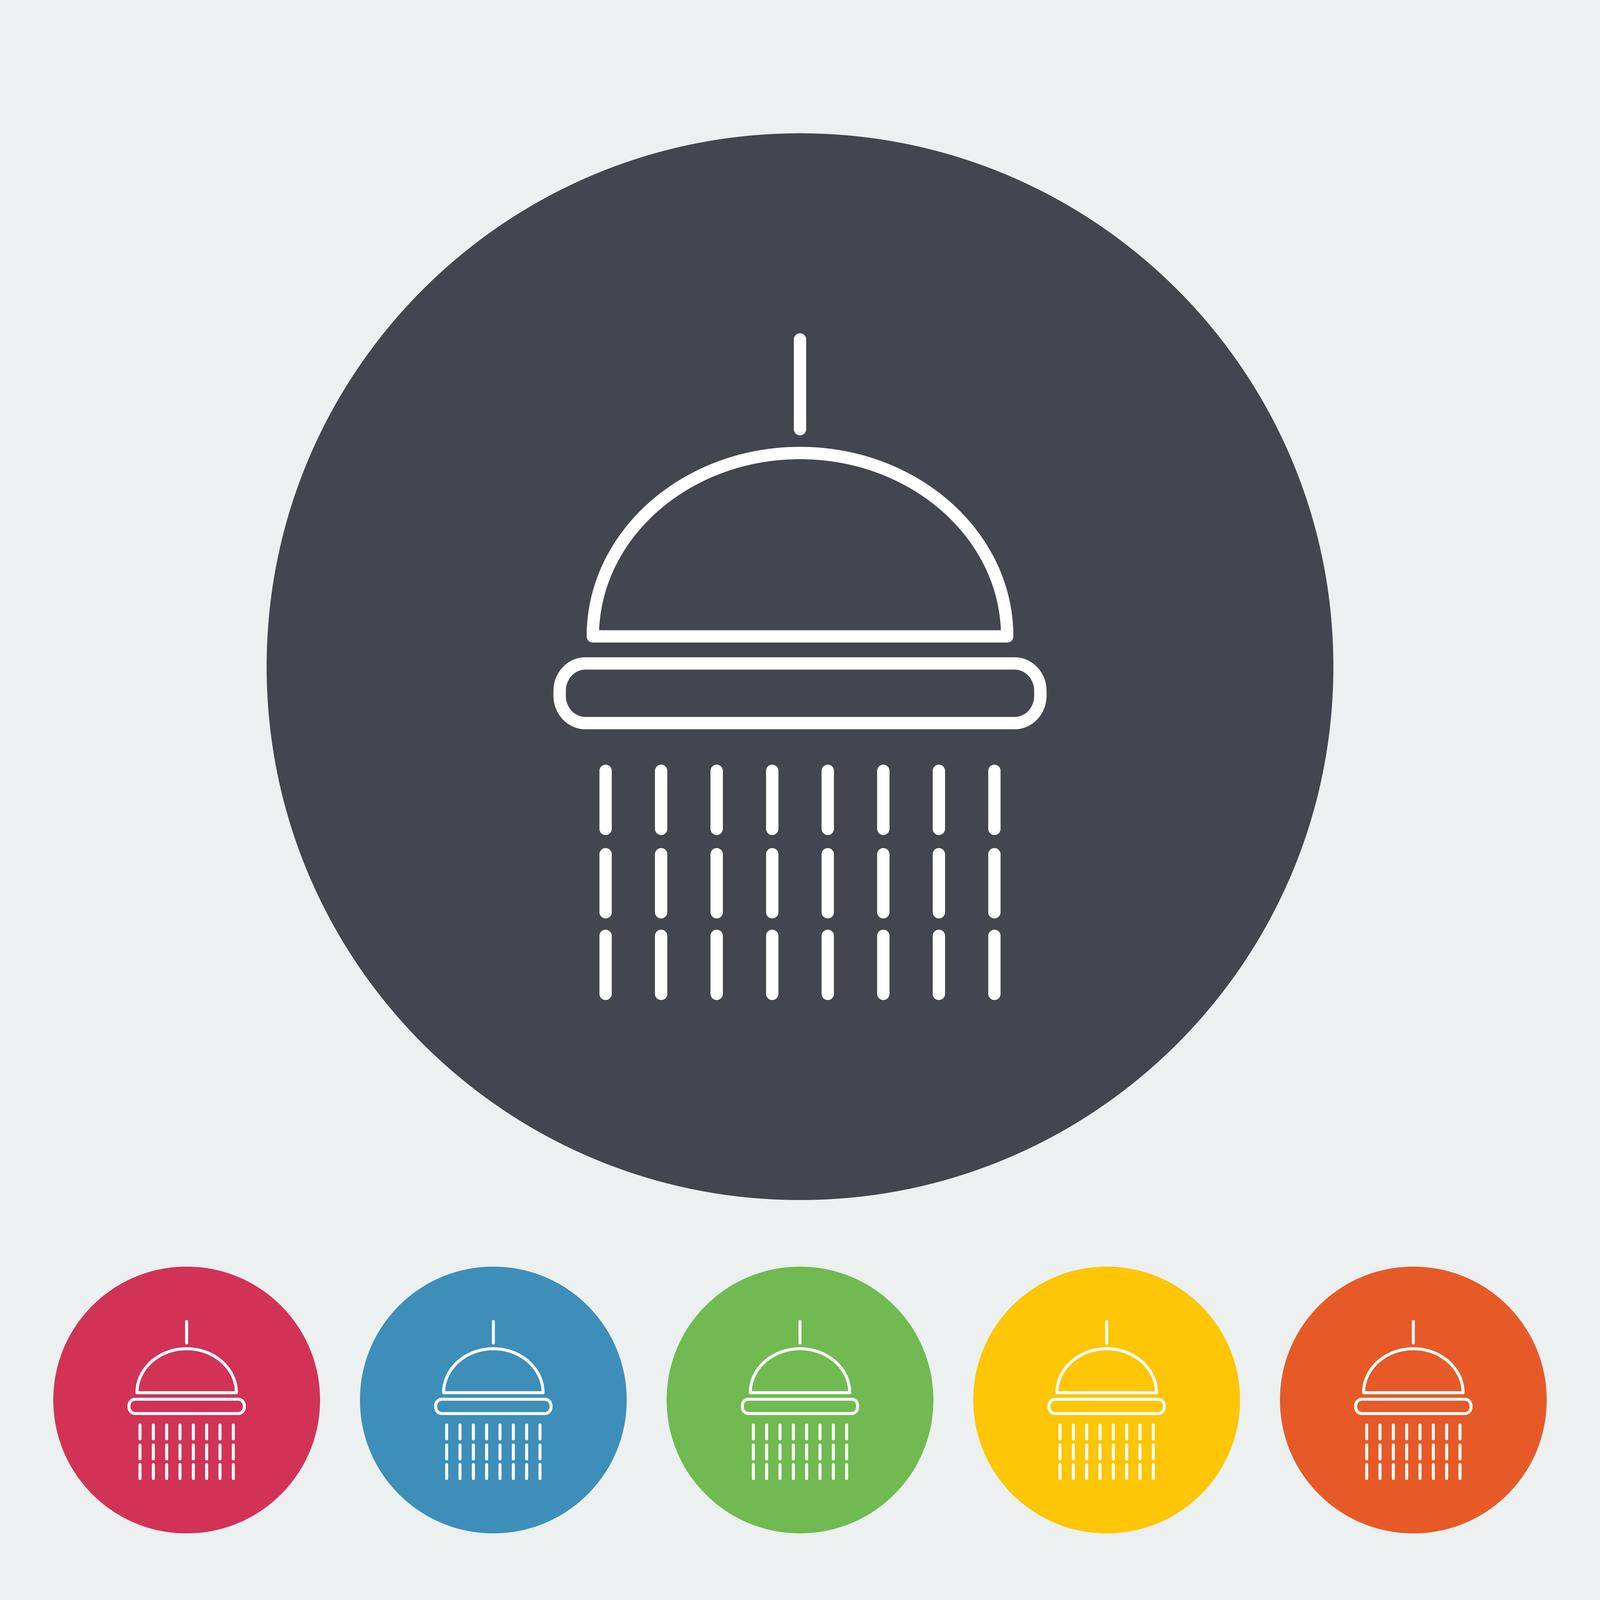 Shower. Single flat icon on the circle. Vector illustration.